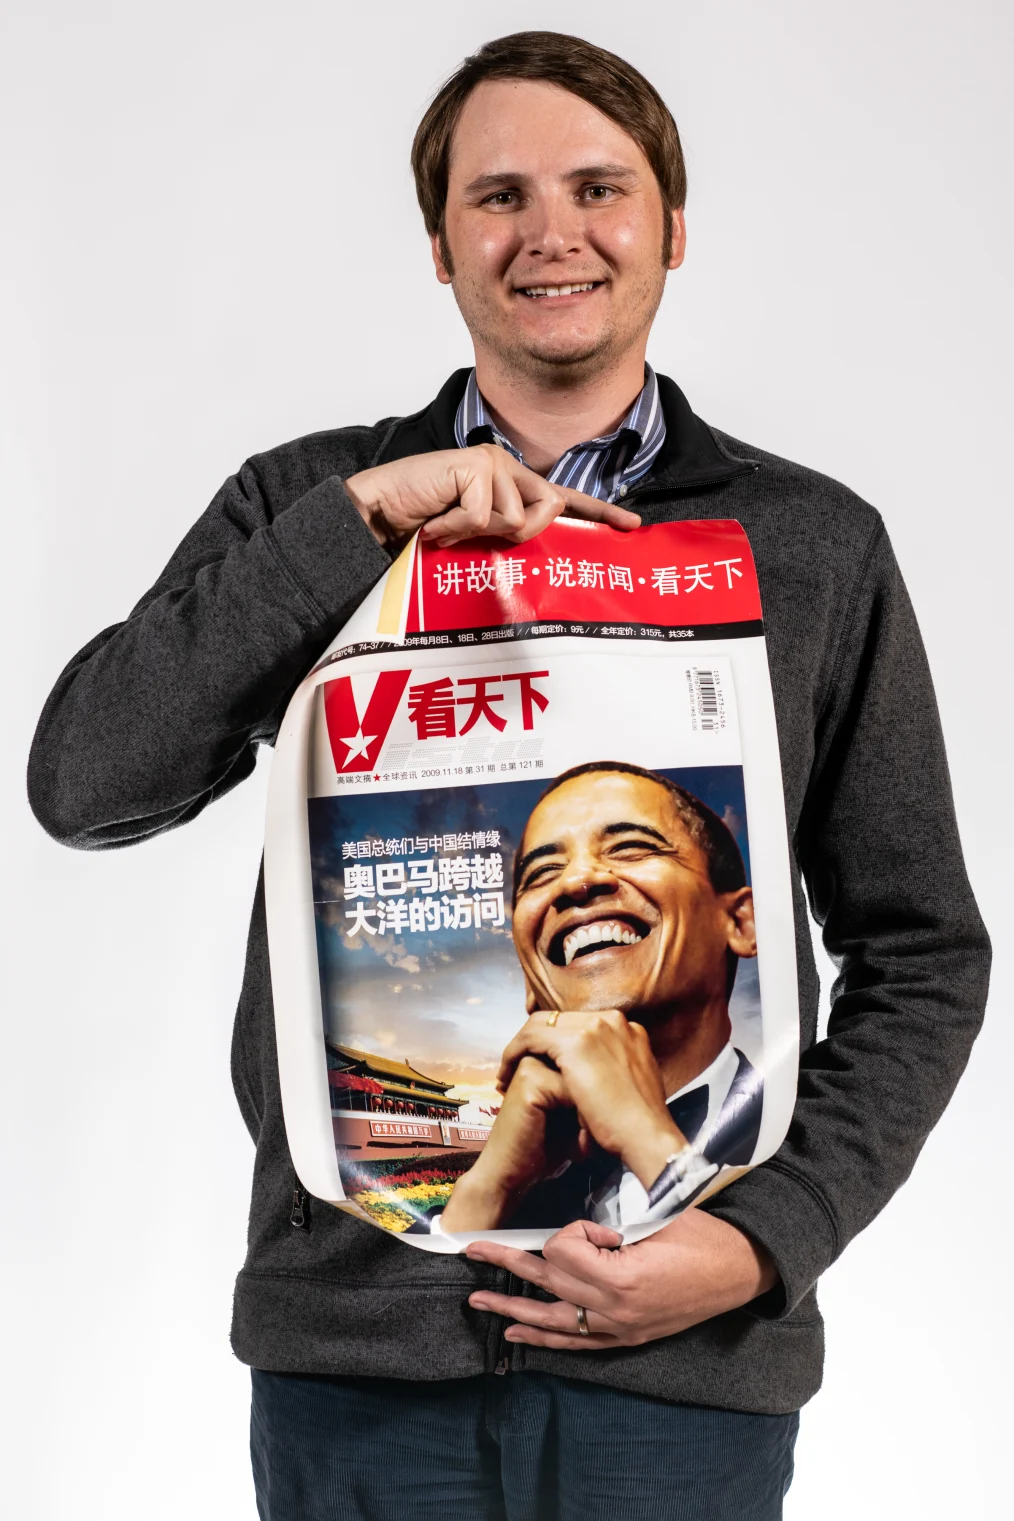 Jordan Oster smiles to camera holding an Obama campaign poster from China.